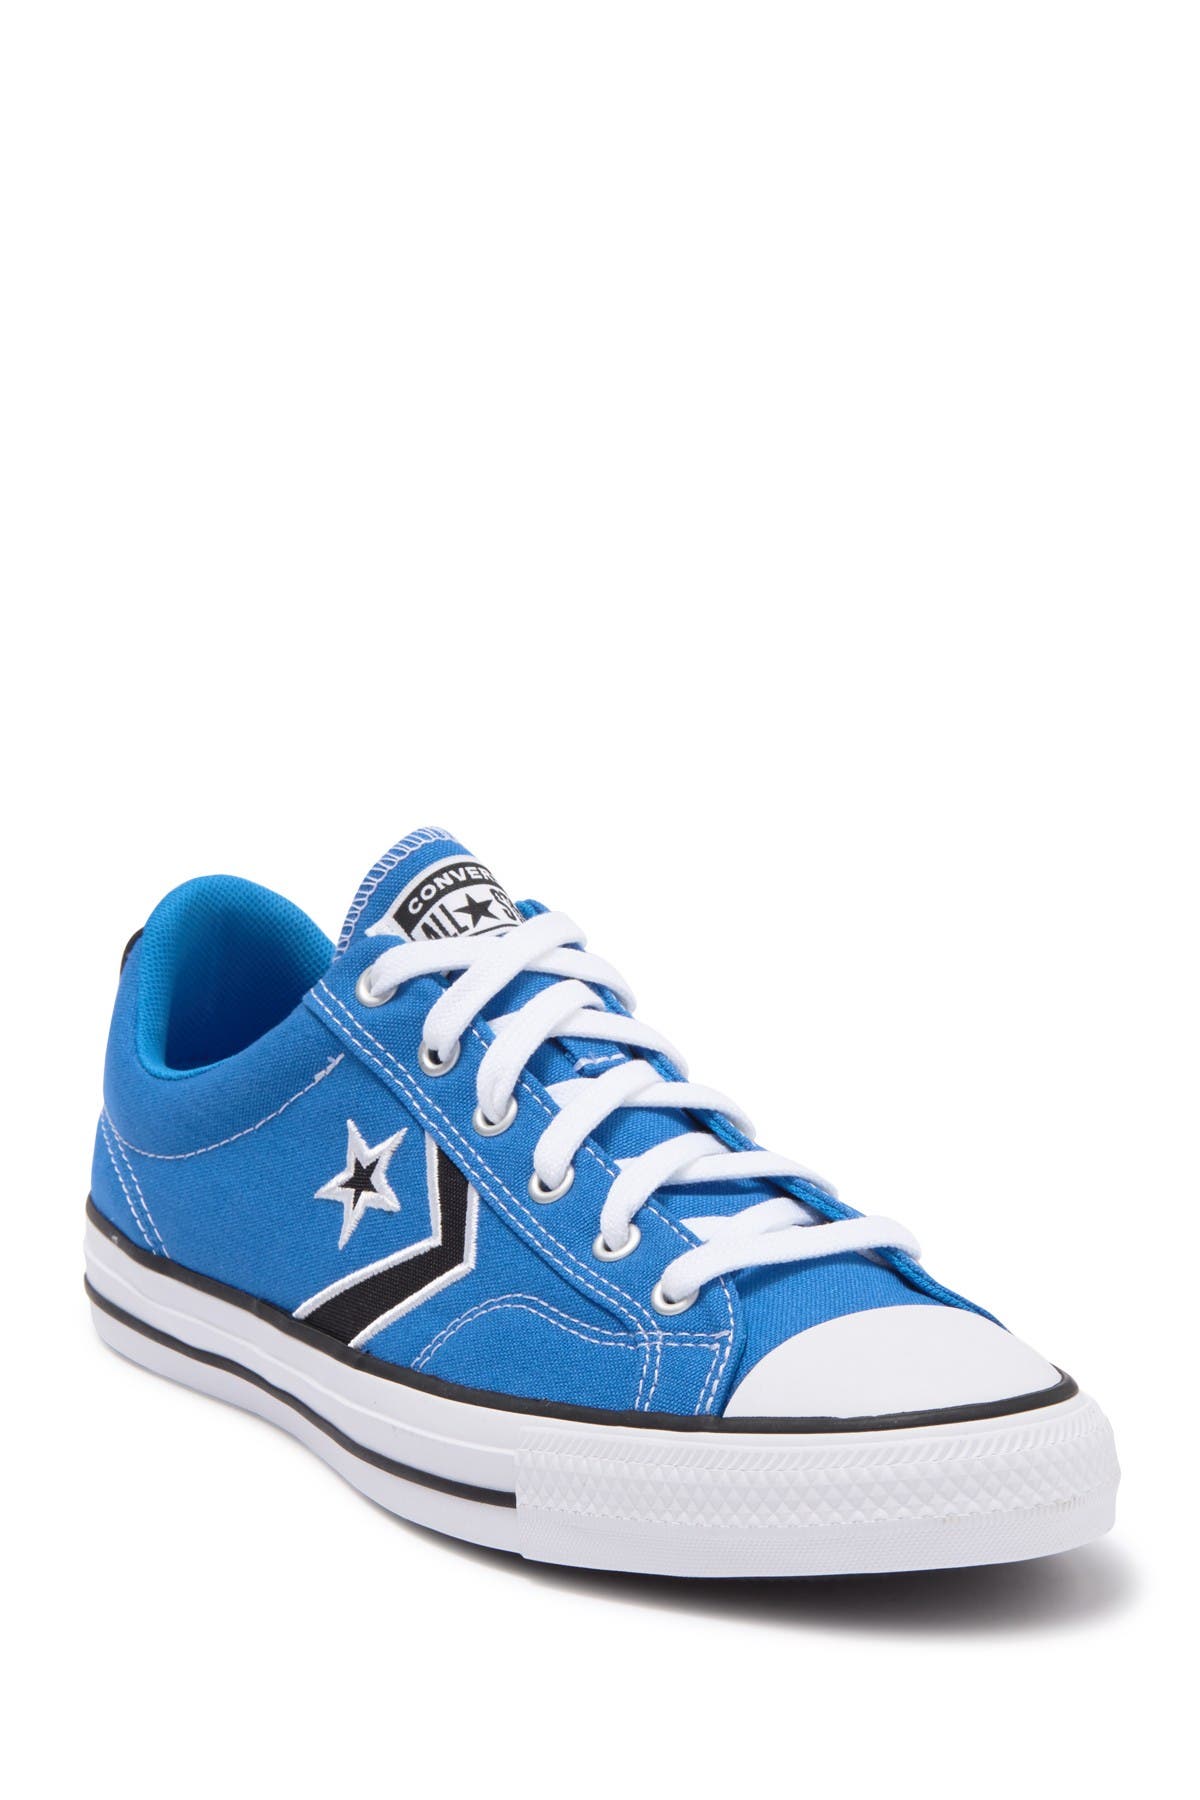 converse star player sneakers